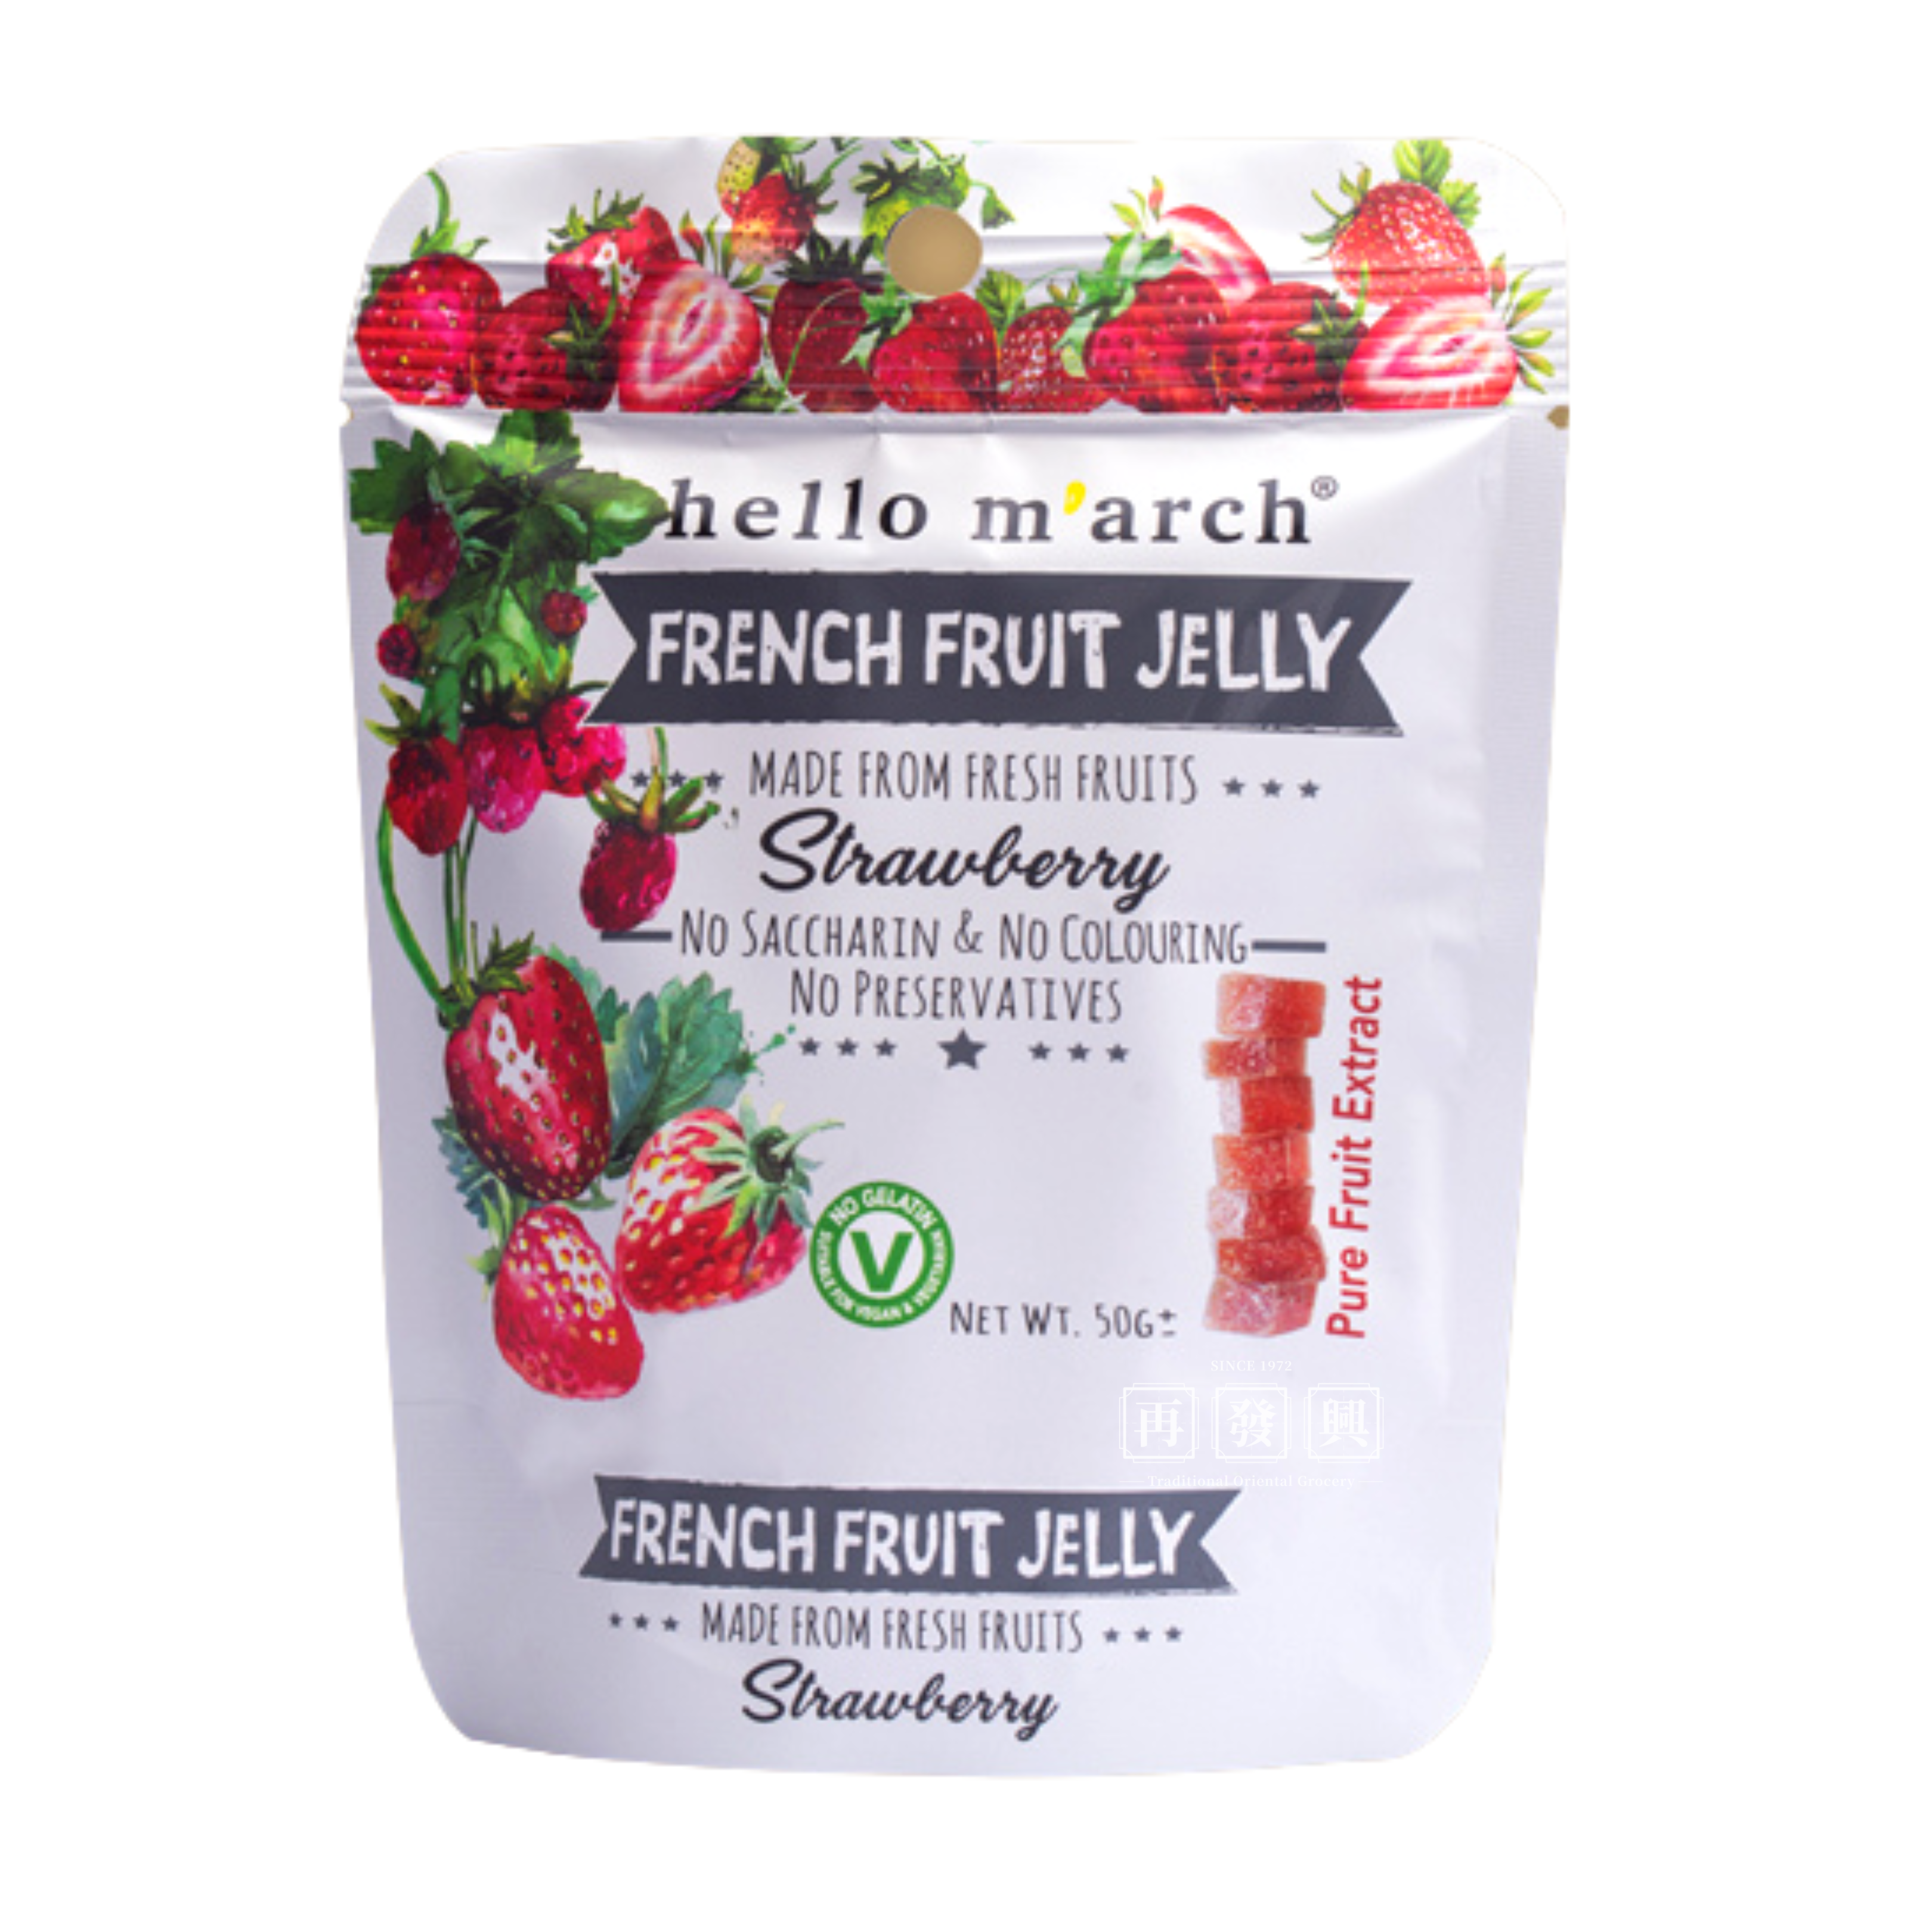 Hello M'arch French Fruit Jelly - Strawberry 法式果冻(草莓)50g